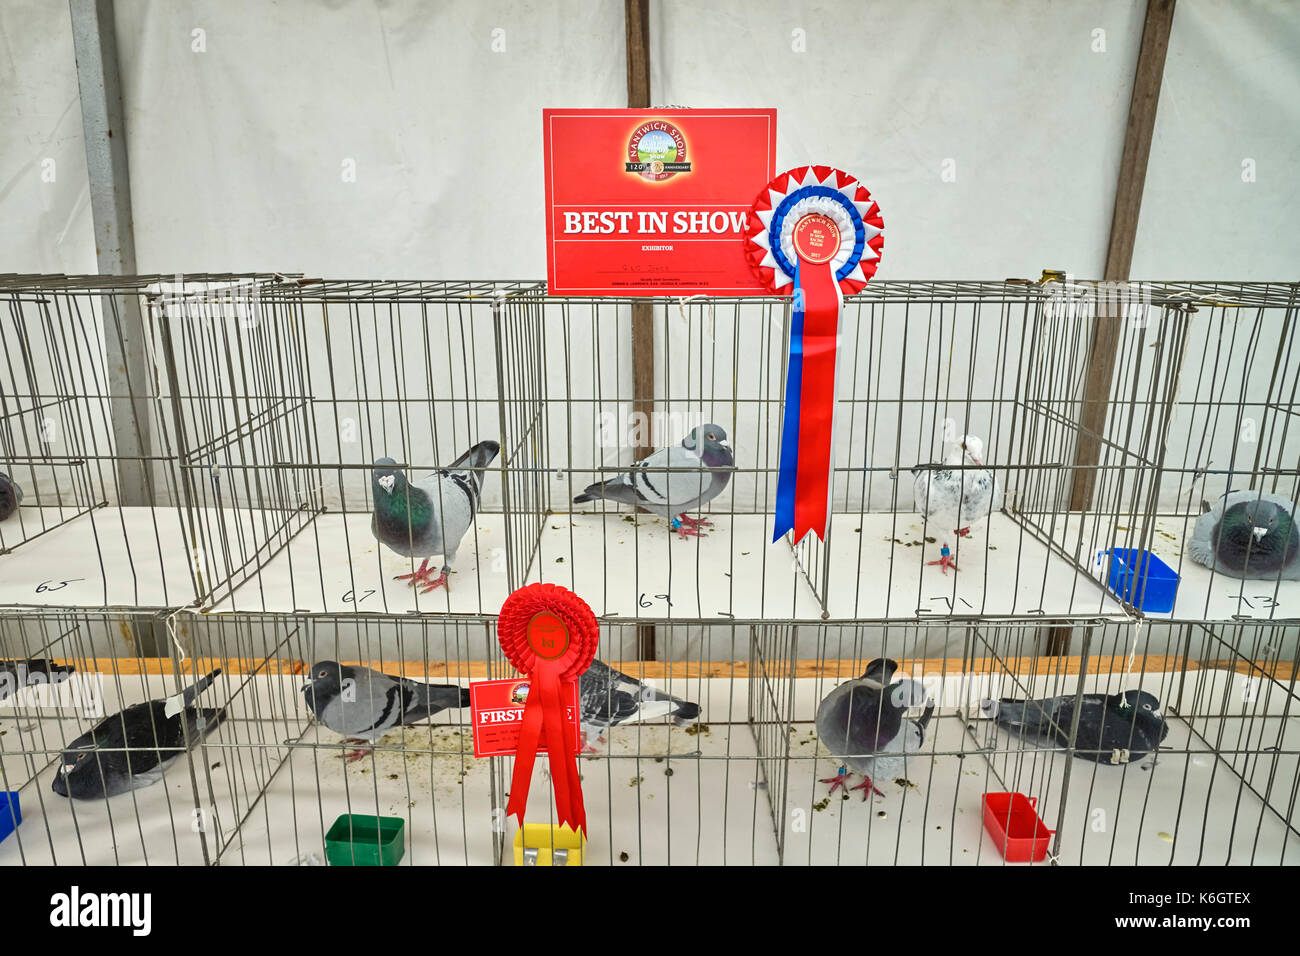 Best in show pigeon in cage Stock Photo